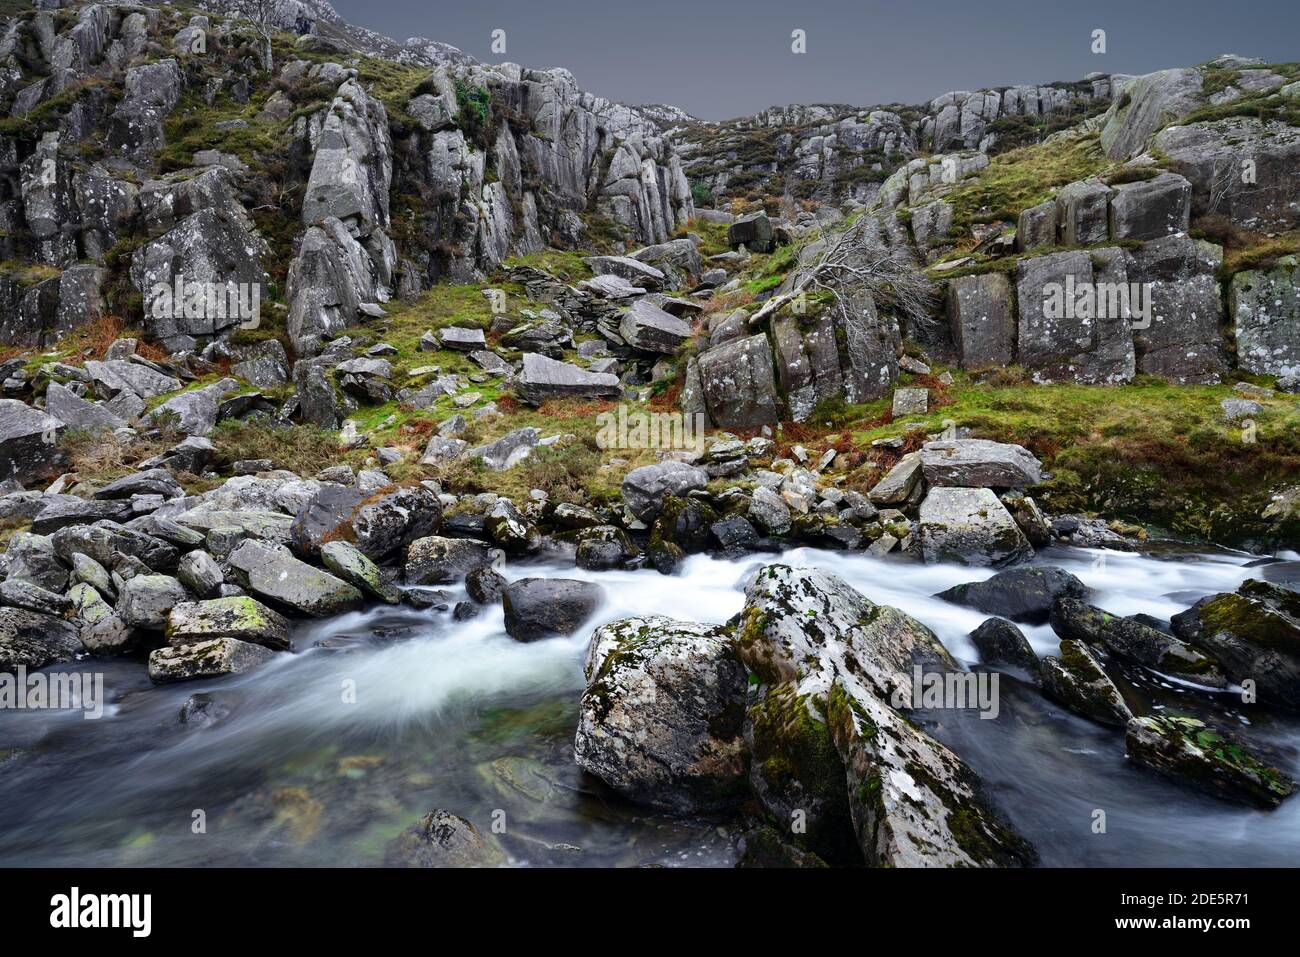 Shown here is the rocky terrain in the Nant Ffrancon valley situated between the Glyderau and the Carneddau mountain ranges in Snowdonia. Stock Photo